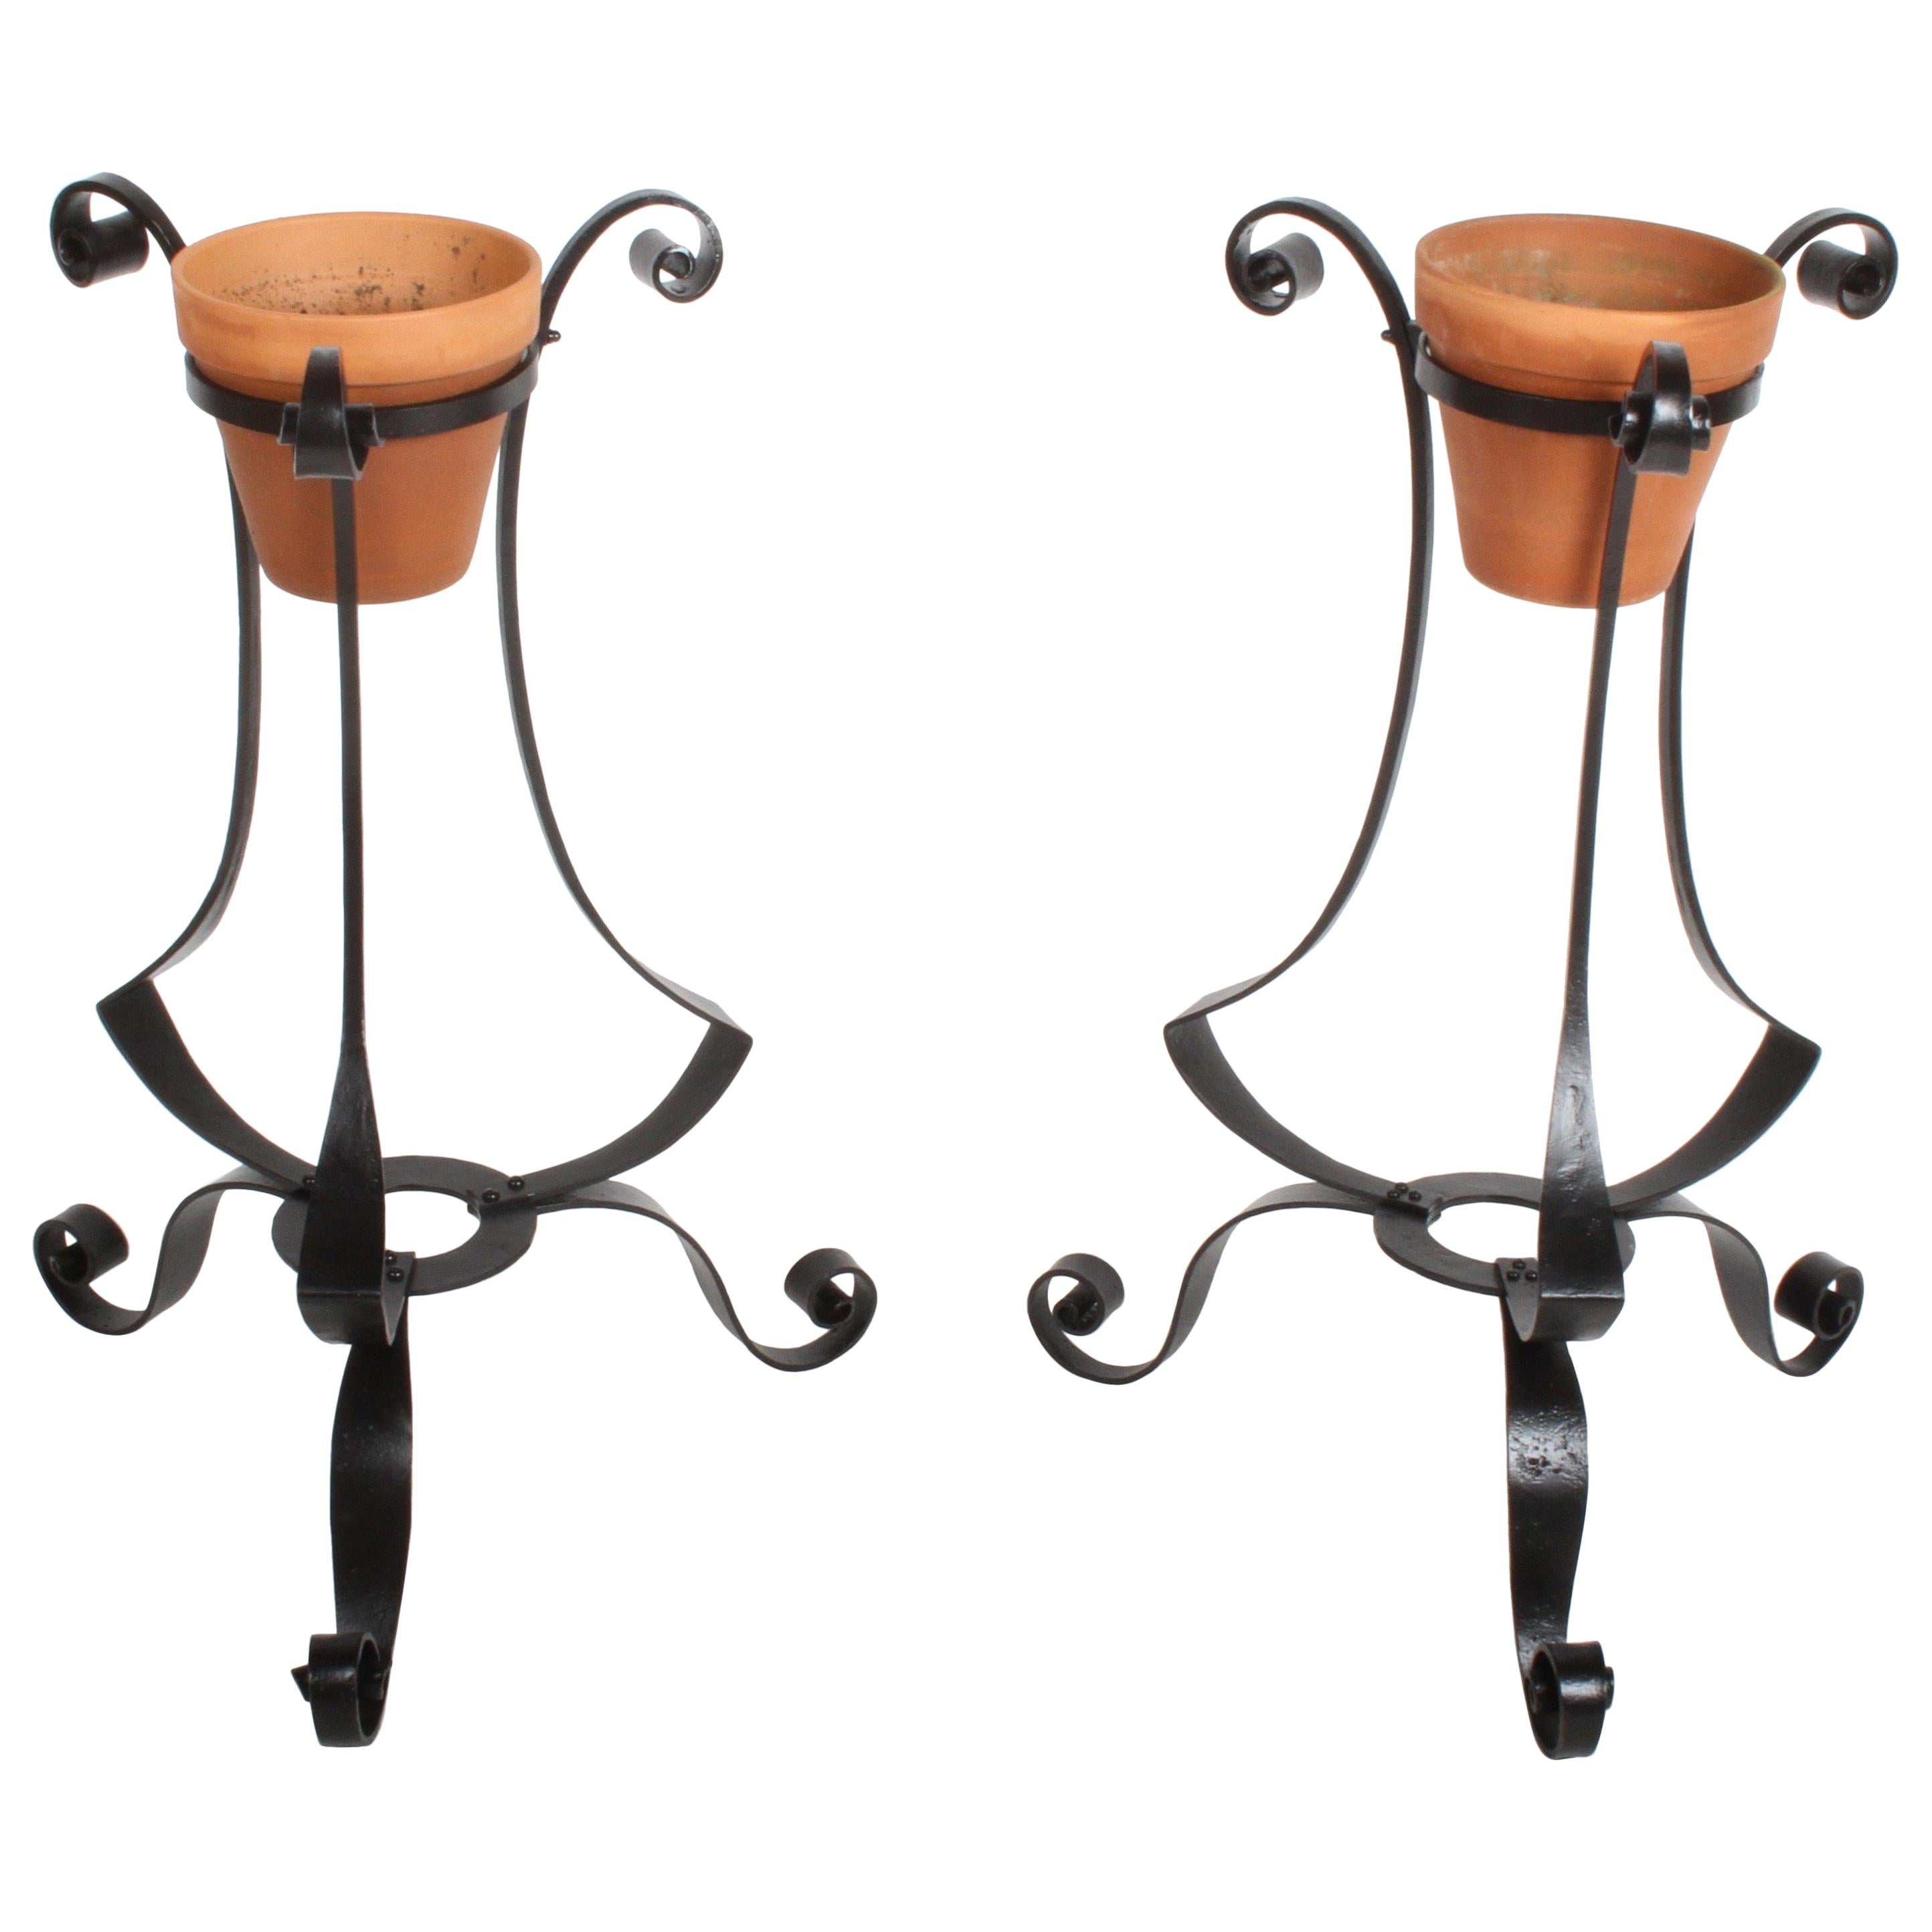 Pair of Arts & Crafts Wrought Iron Planters, Restored